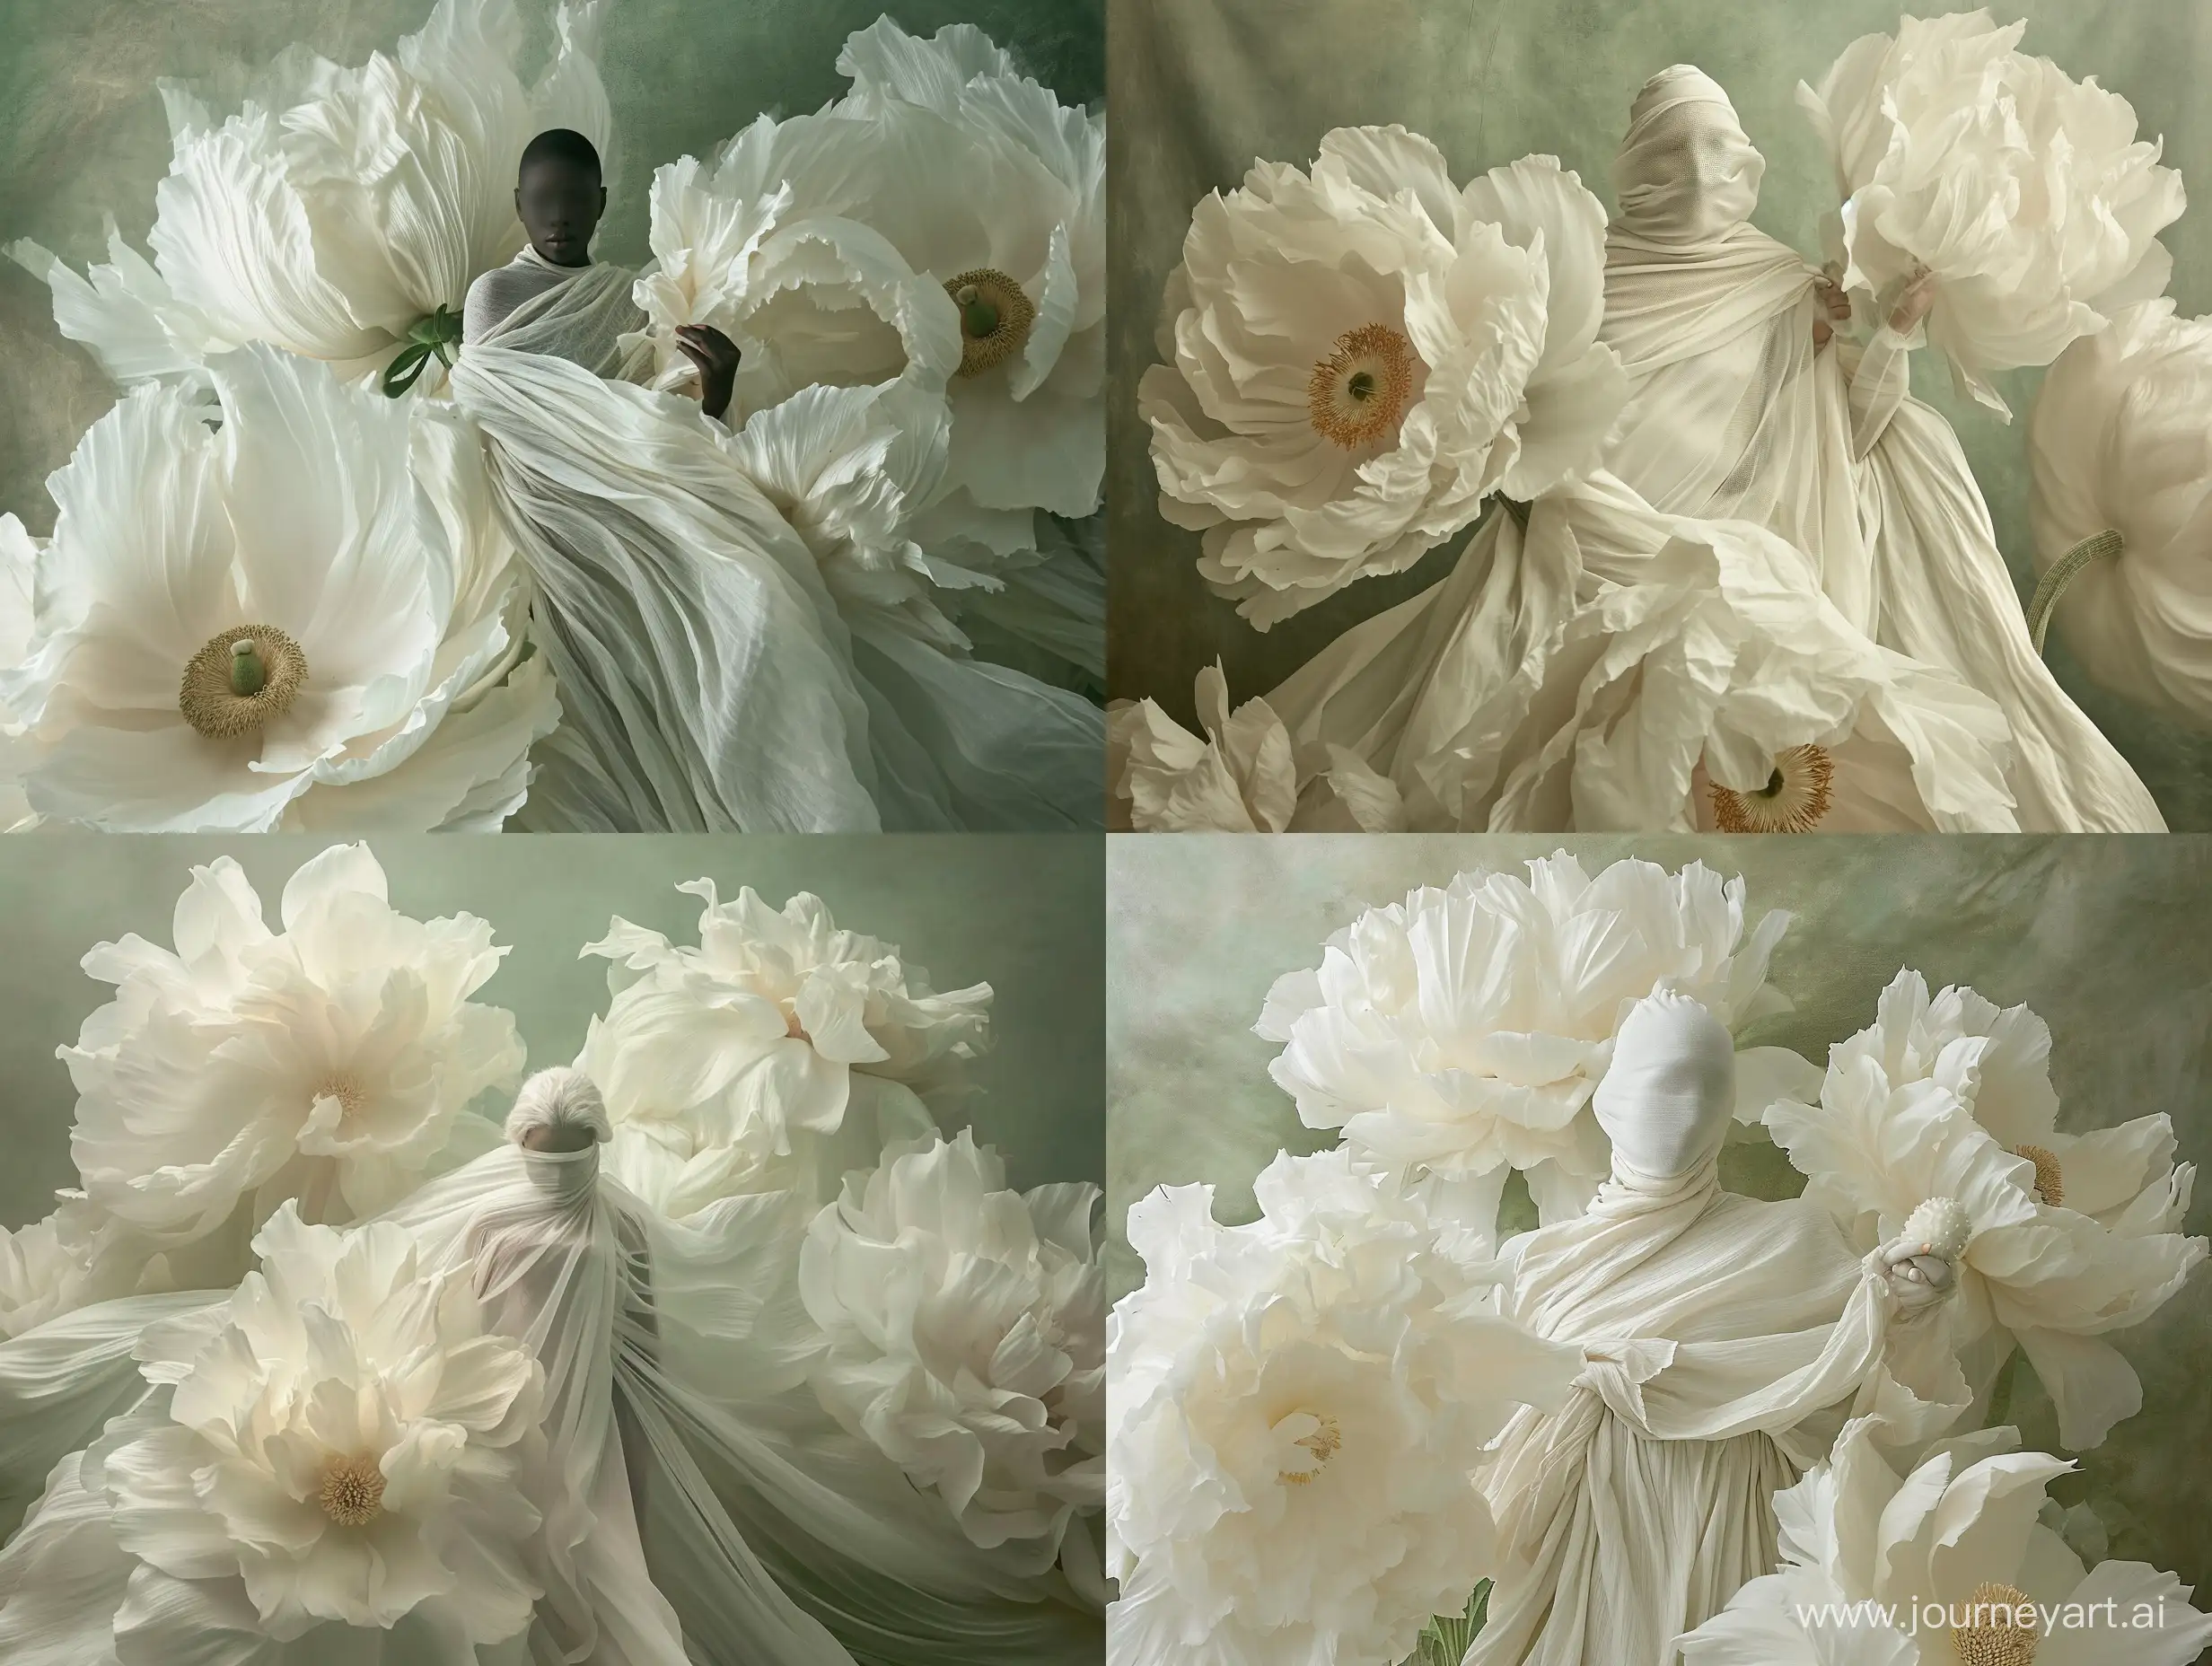 A person with their face obscured, standing amidst large, white flowers, wearing a flowing, ethereal gown that mimics the shape and color of the surrounding flowers. The gown is white and has a soft texture, appearing almost translucent and blending seamlessly with the flowers. The individual holds one of the large flowers in their hand; it's as if they are part of this serene, dreamlike environment. The background is muted with tones of green and grey, creating a calm atmosphere that highlights the subject and flowers.